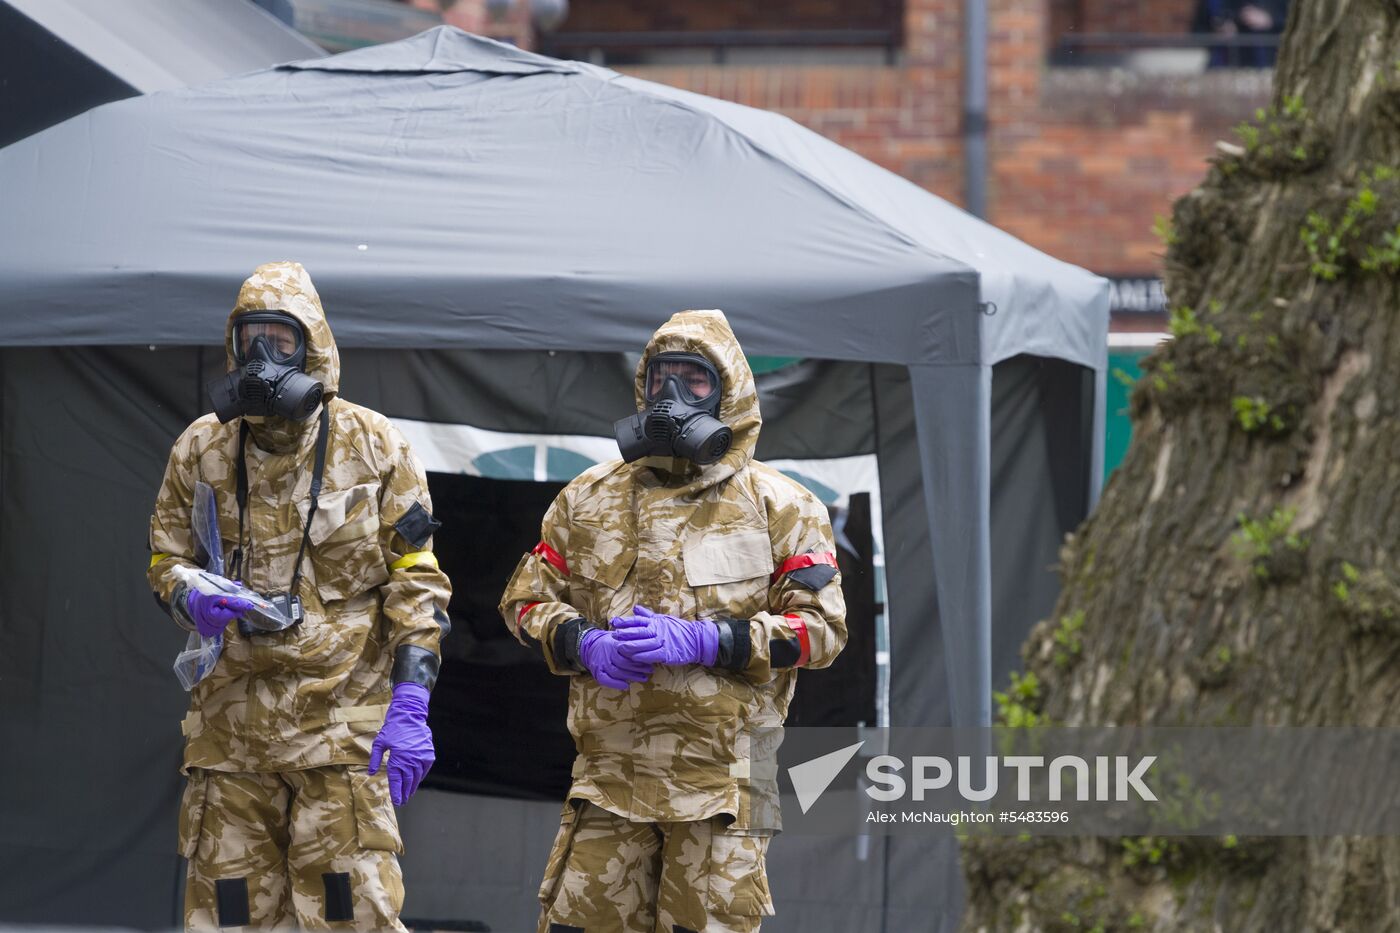 Salisbury begins cleaning spots related to Skripal poisoning